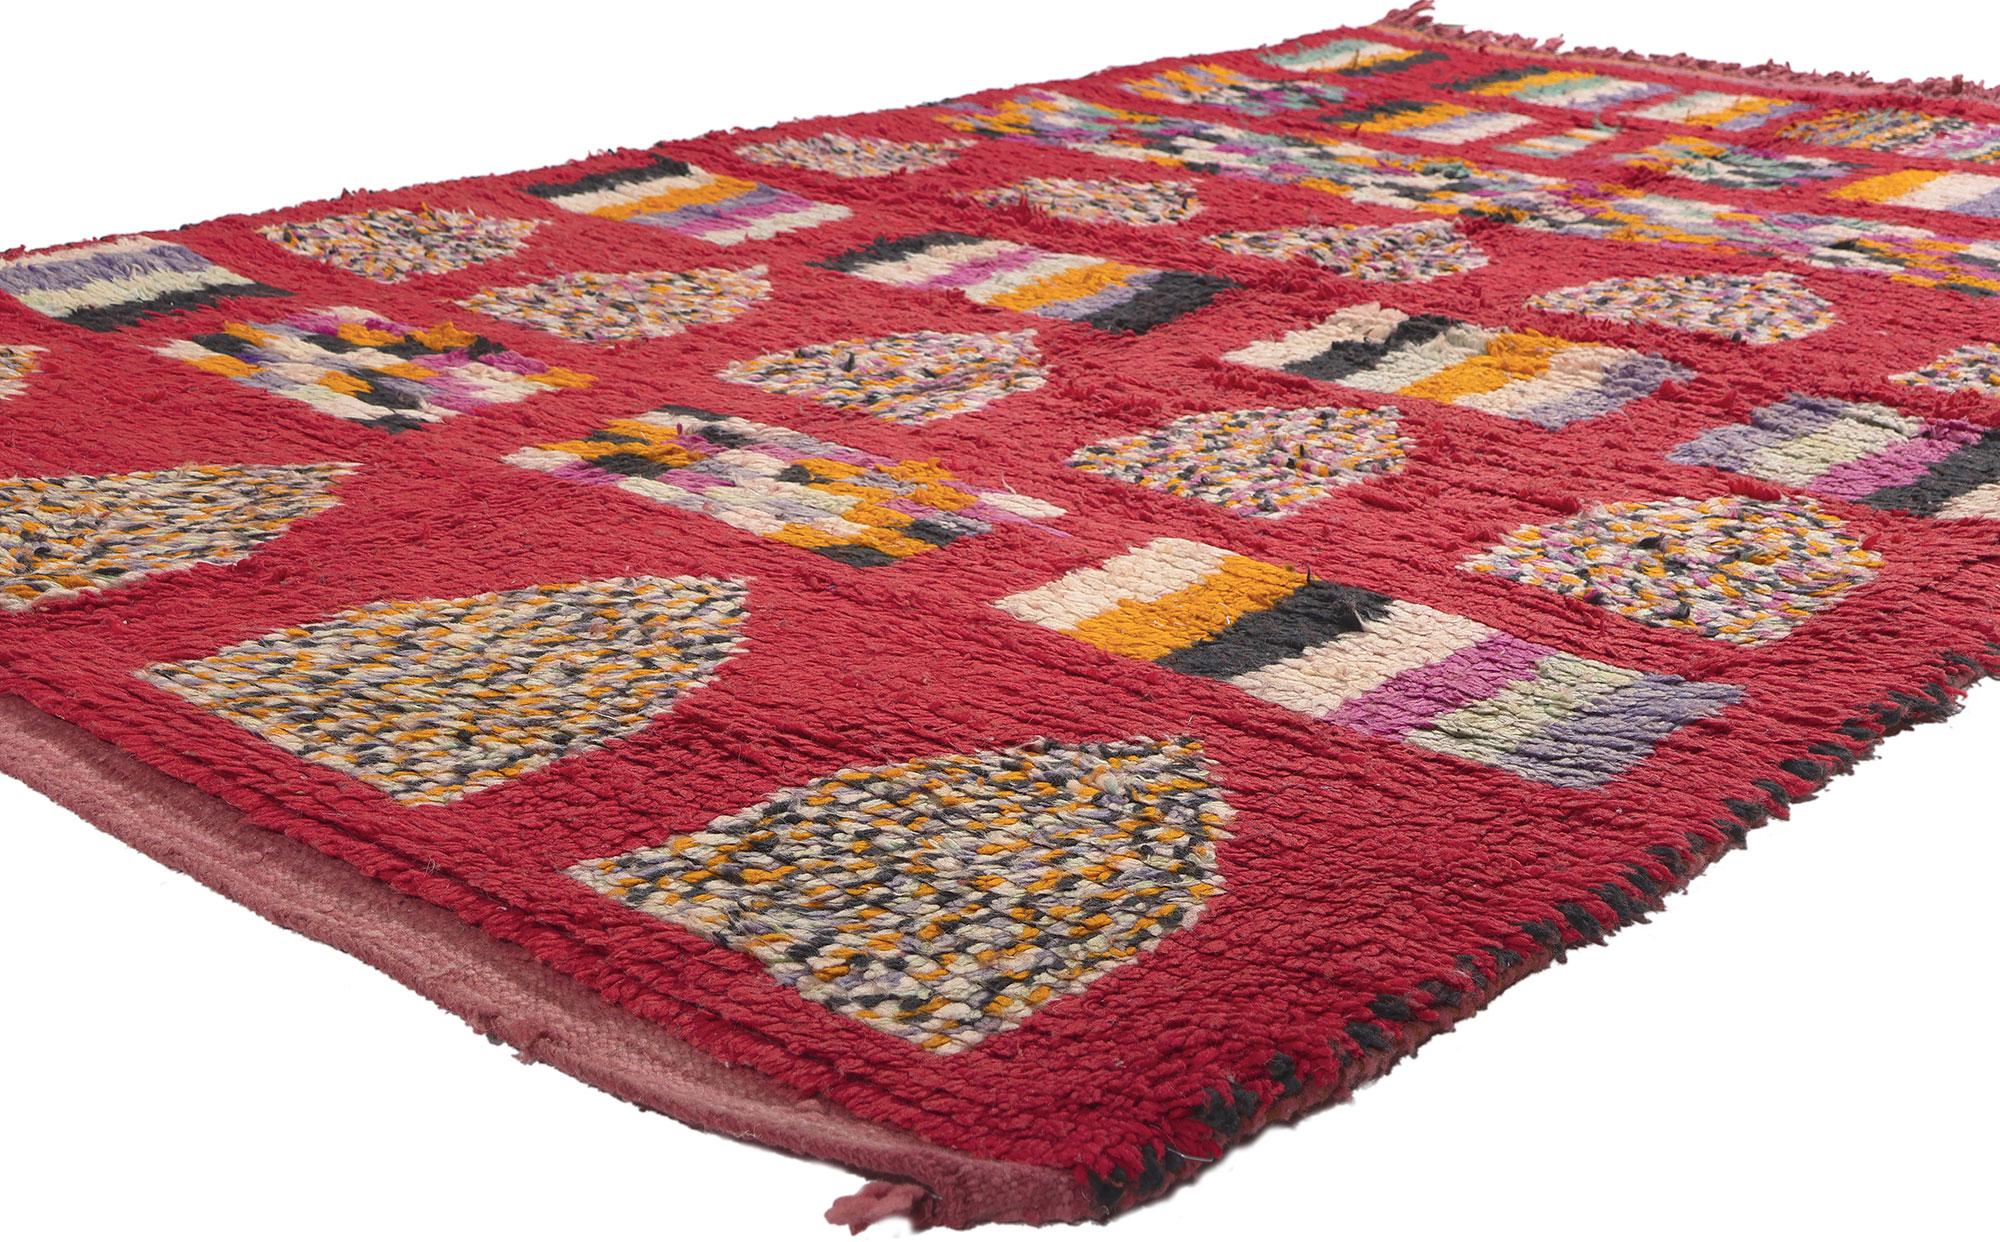 20289 Vintage Red Rehamna Moroccan Rug, 05'04 x 08'03. From the sun-drenched plains of Rehamna east of Marrakech emerges a rug that defies expectations with its rich and eclectic designs. Immersed in a Maximalist aesthetic, this hand-knotted wool